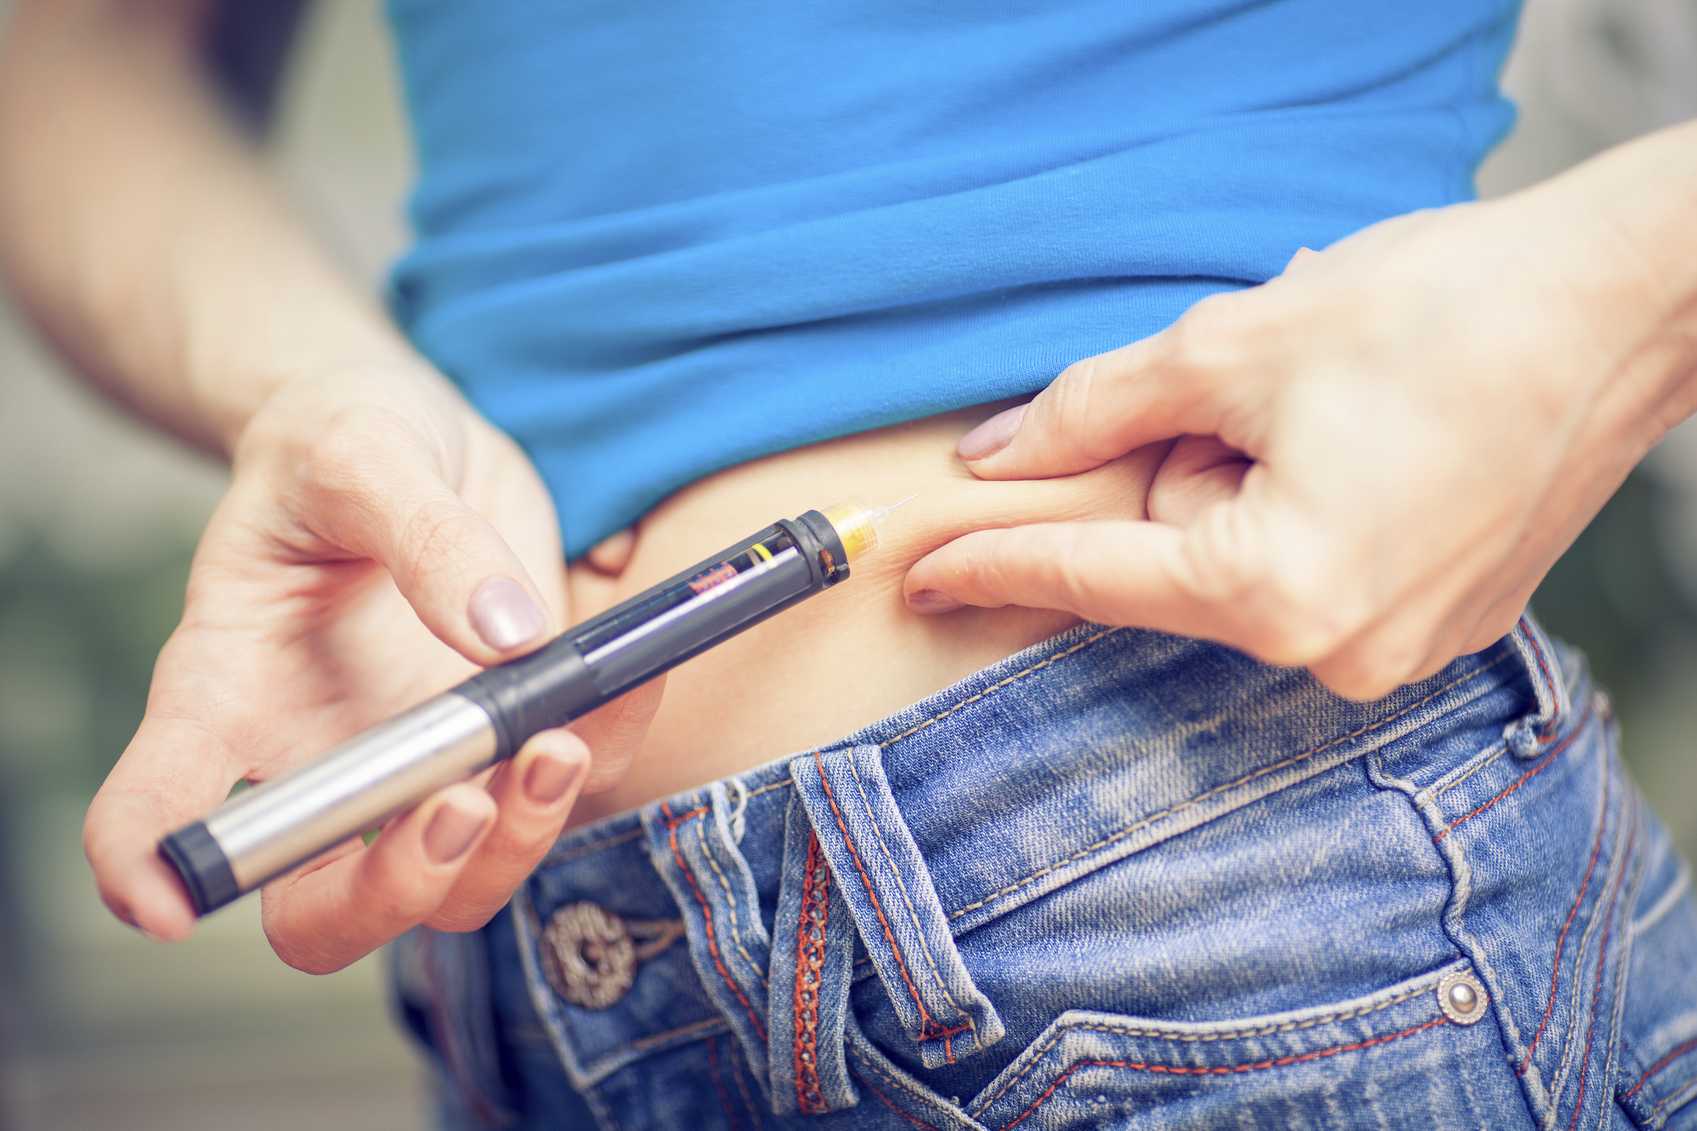 Picture-of-woman-doing-injection-with-insulin-pen_MEDIUM